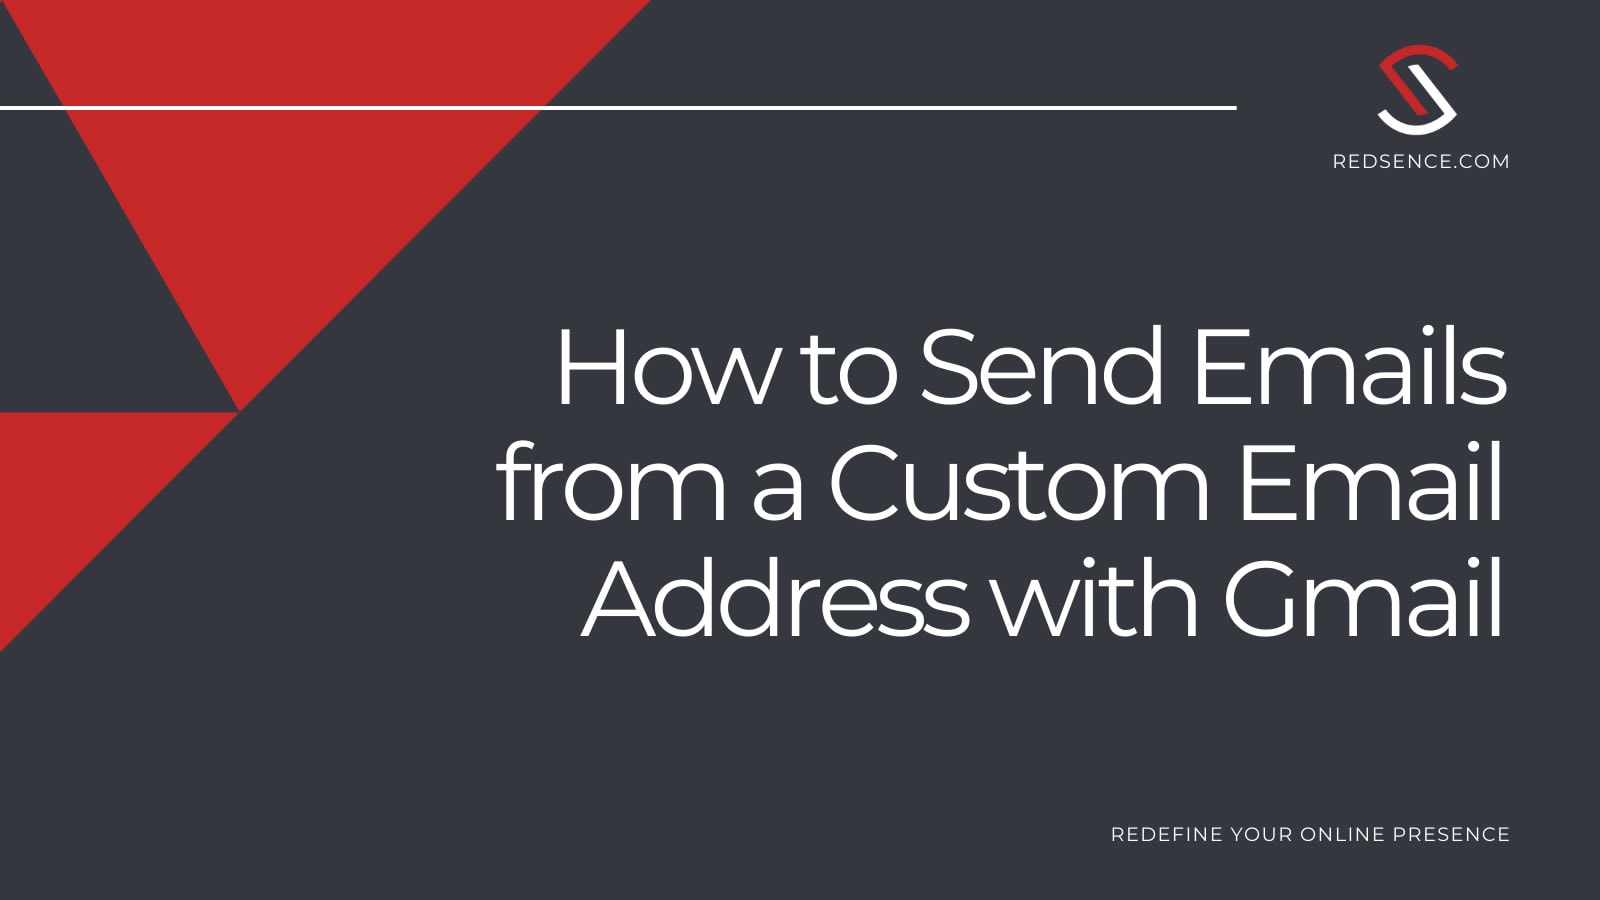 How to Send Emails from a Custom Email Address with Gmail